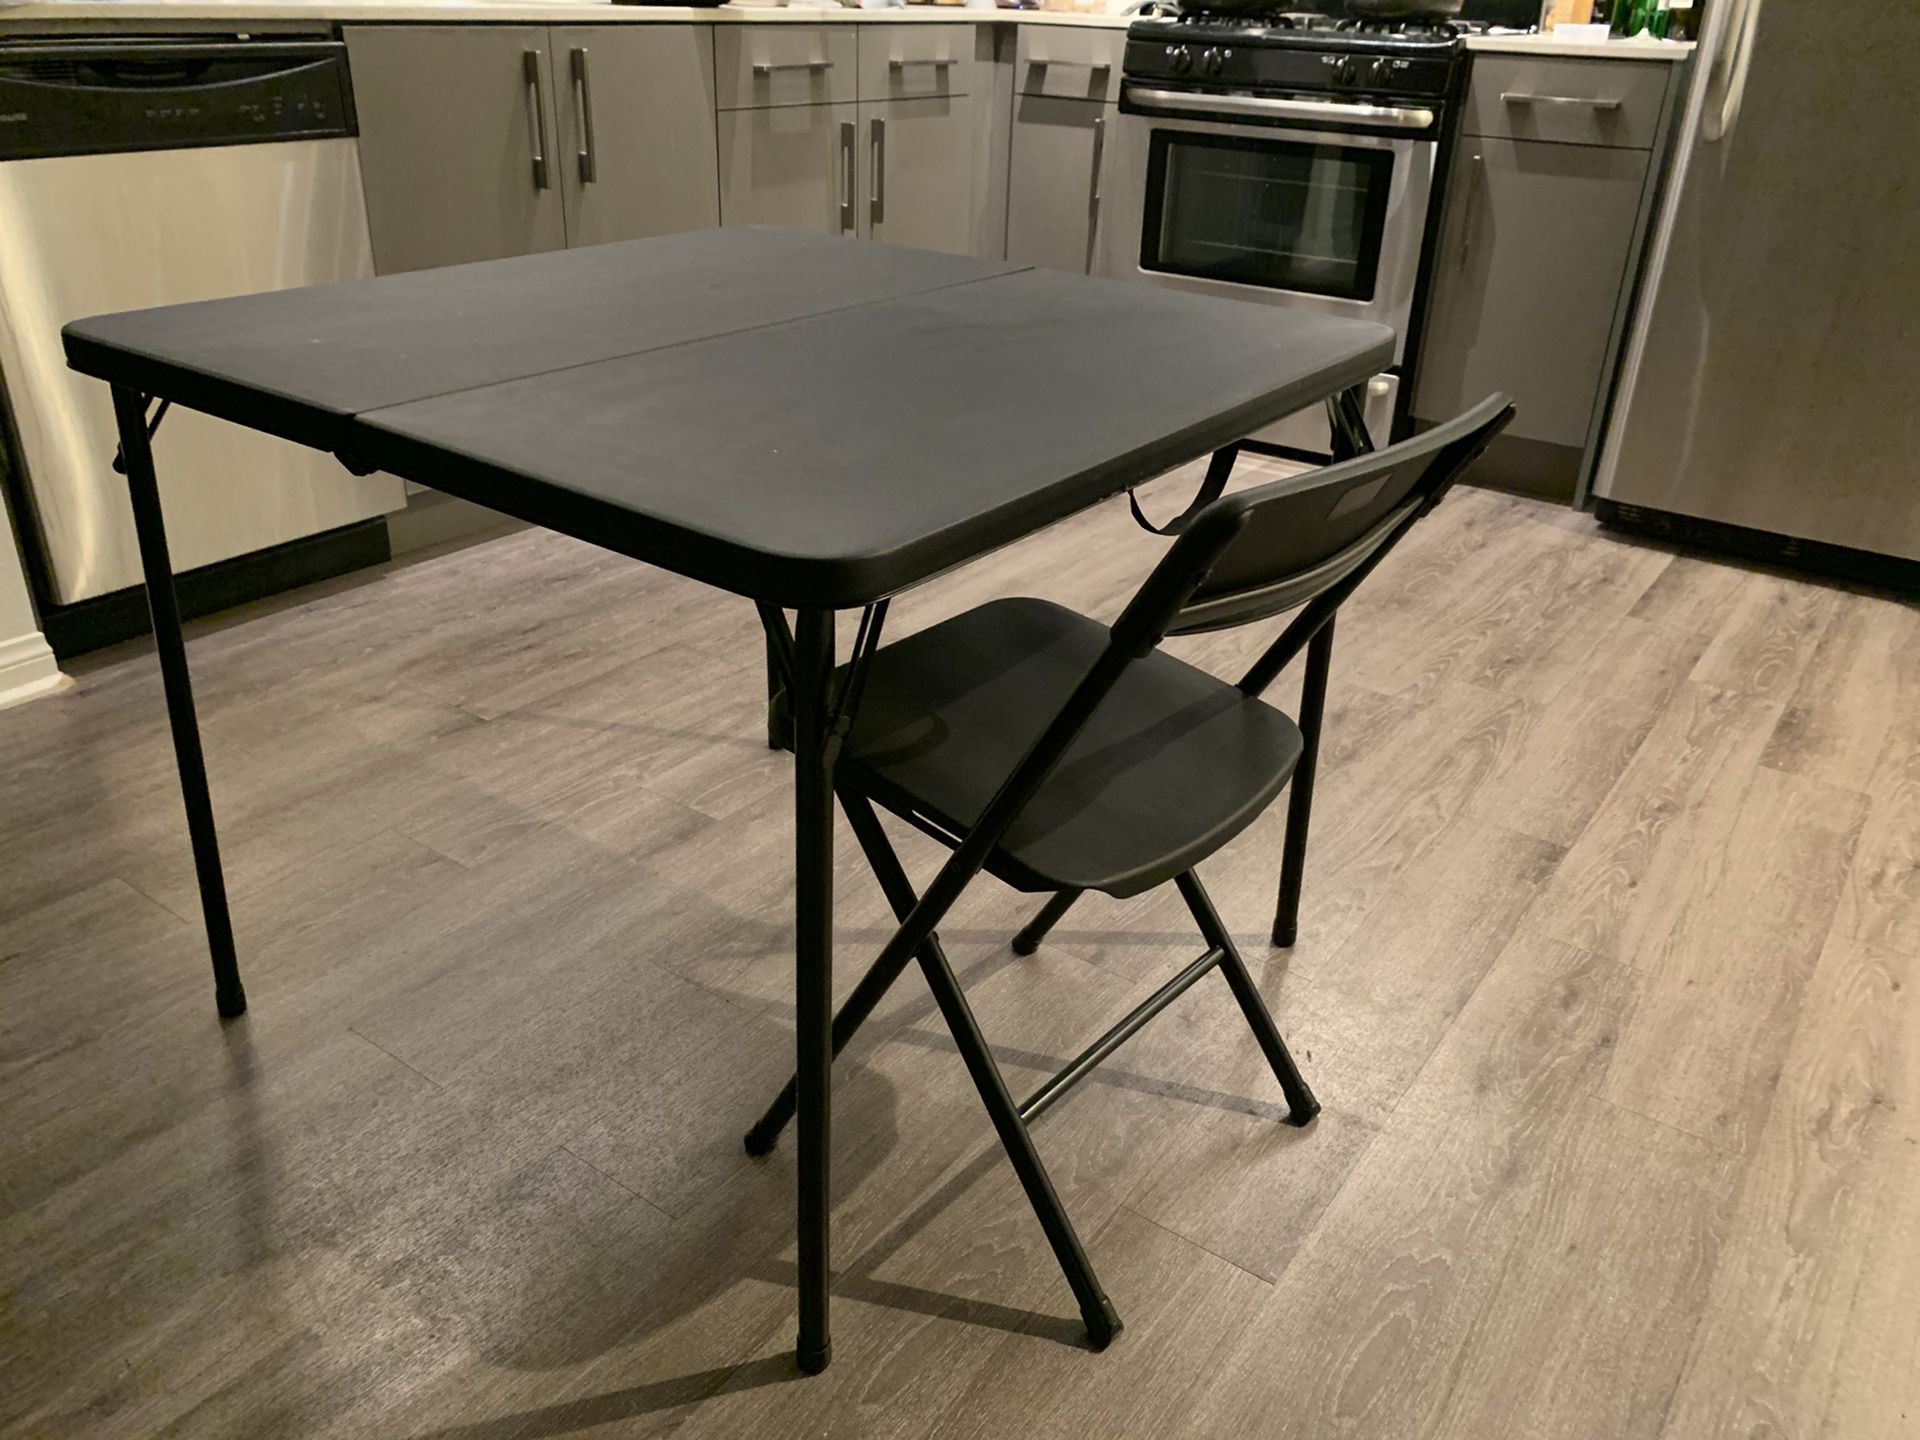 Portable folding dining table with 4 chairs like new